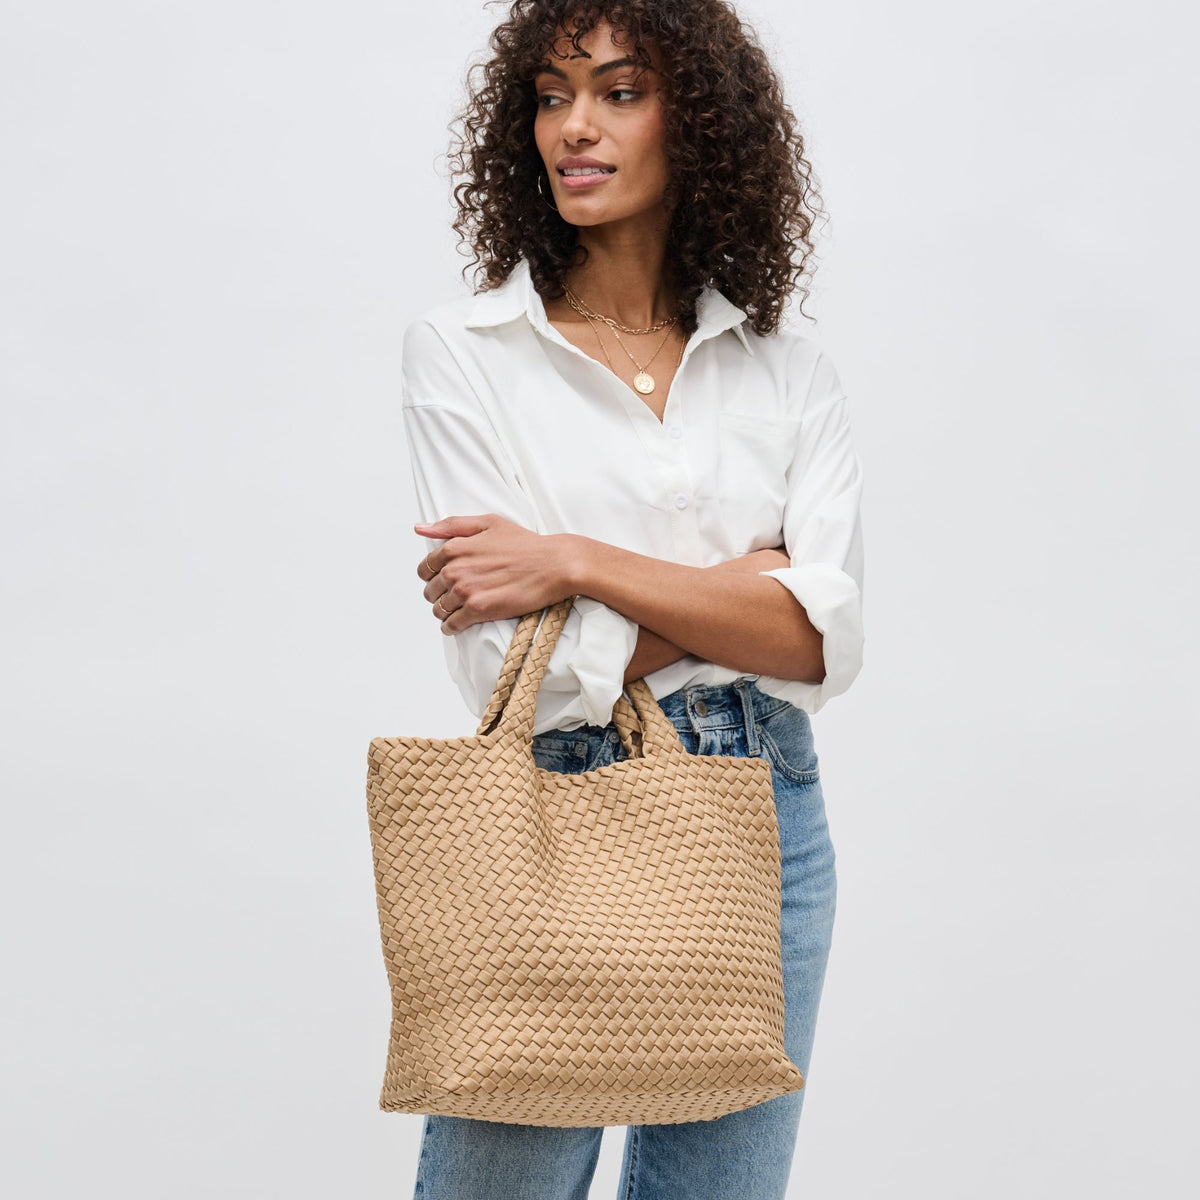 Woman wearing Nude Sol and Selene Sky's The Limit - Medium Tote 841764107785 View 4 | Nude